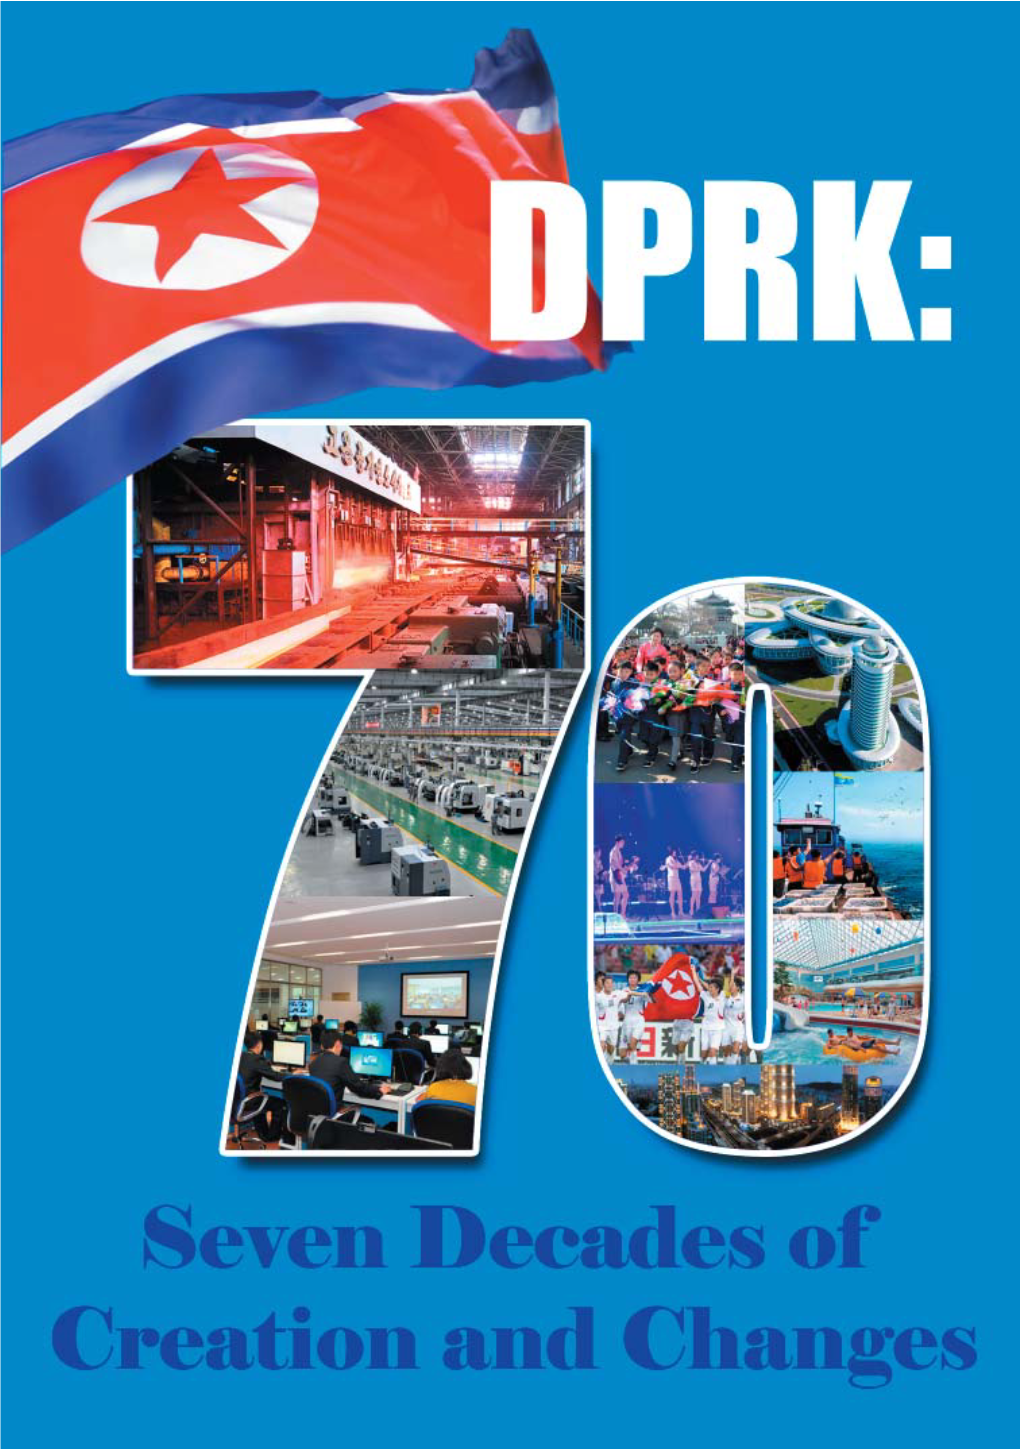 DPRK – Seven Decades of Creation and Changes